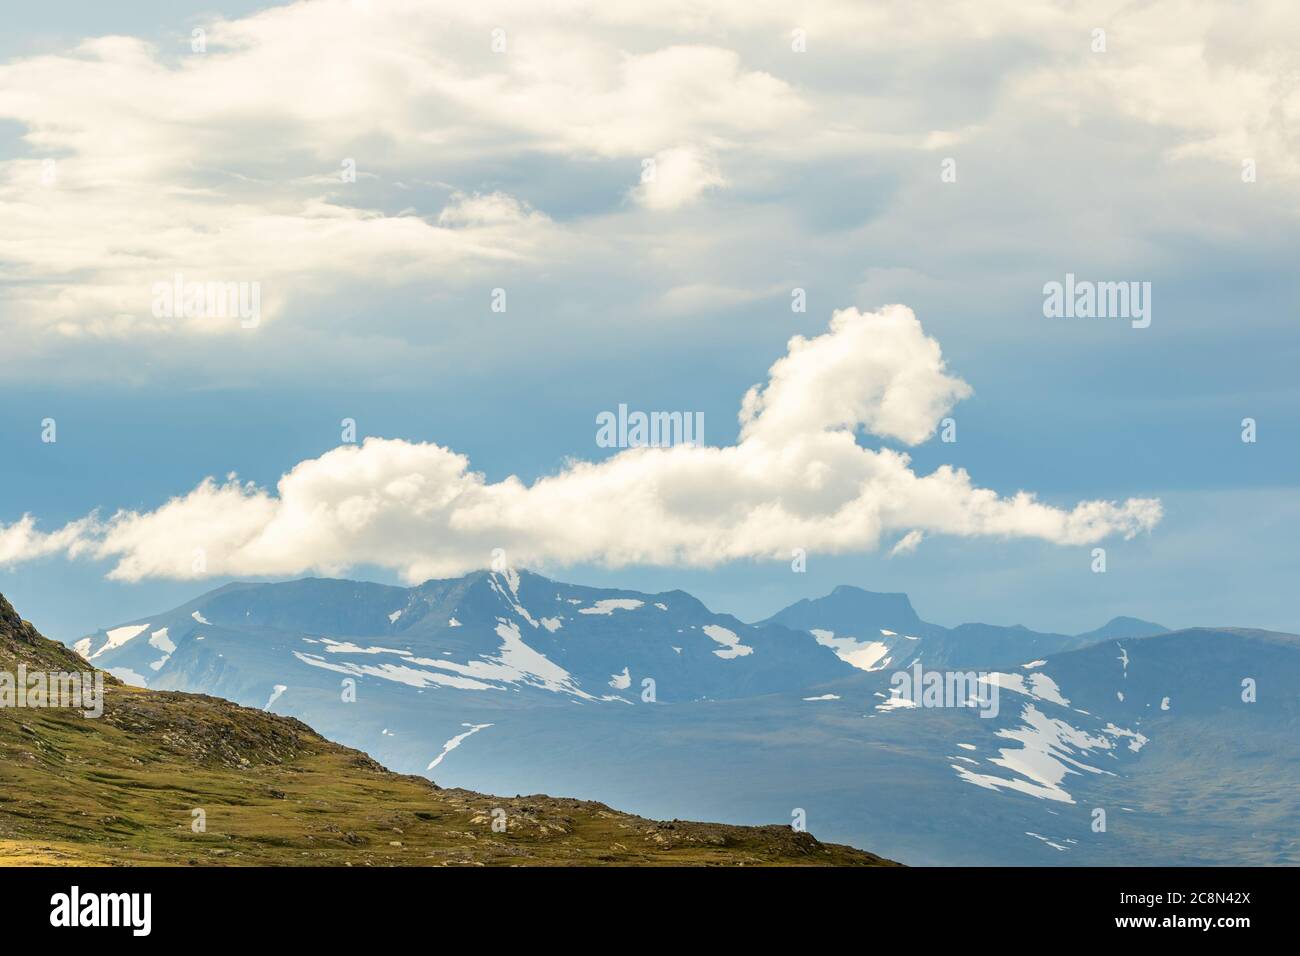 Cloud formation on the sky over a mountain landscape Stock Photo